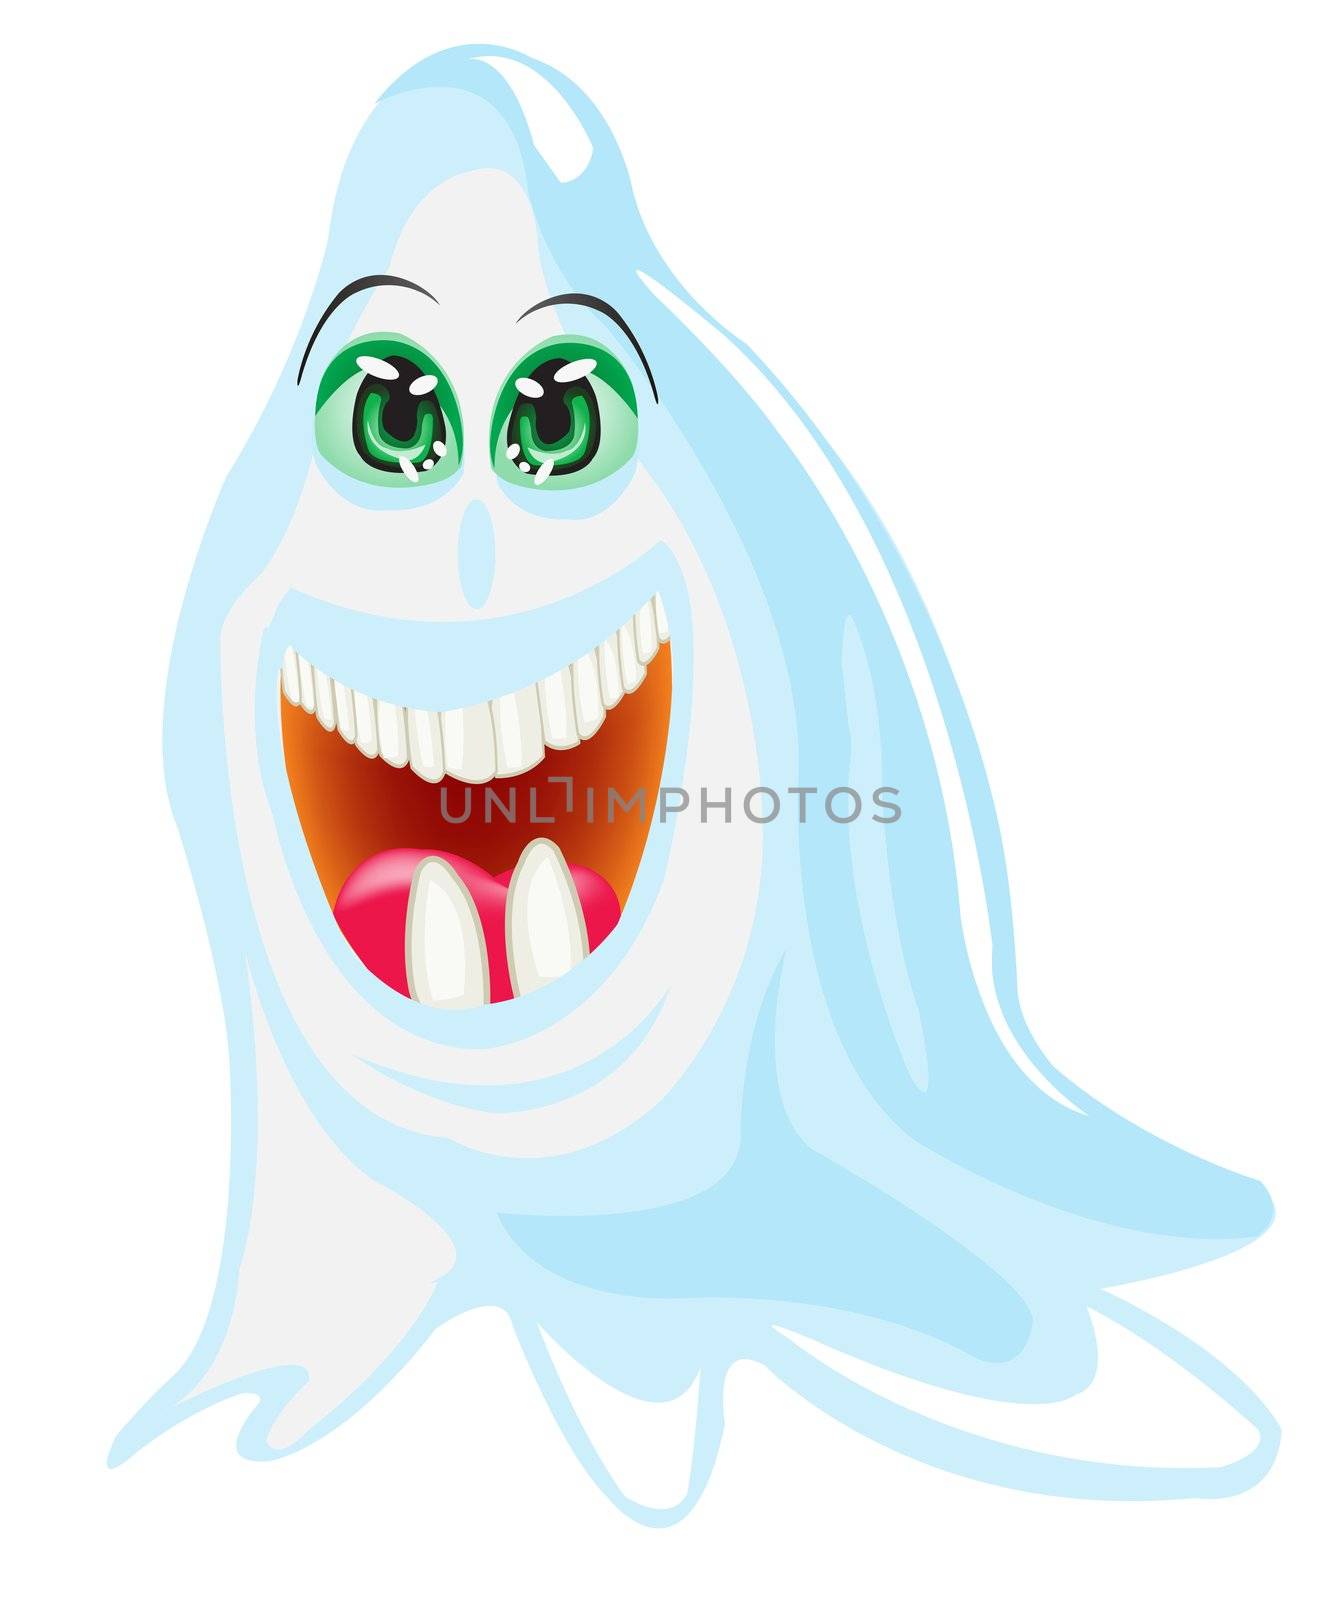 Ghost on white background by cobol1964